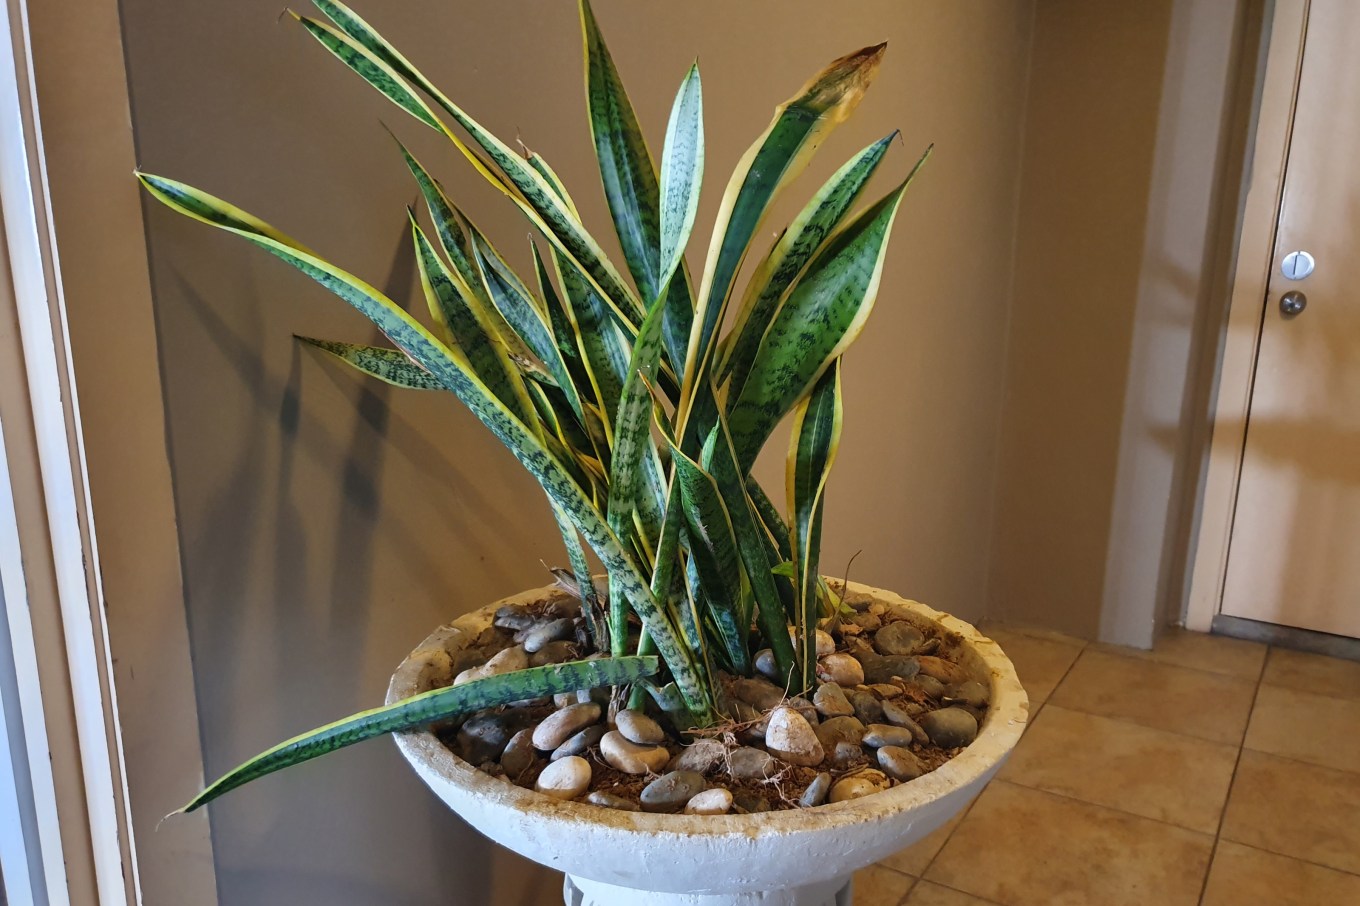 A snake plant, also known as mother-in-law's tongue or sword plant, inside of a house.